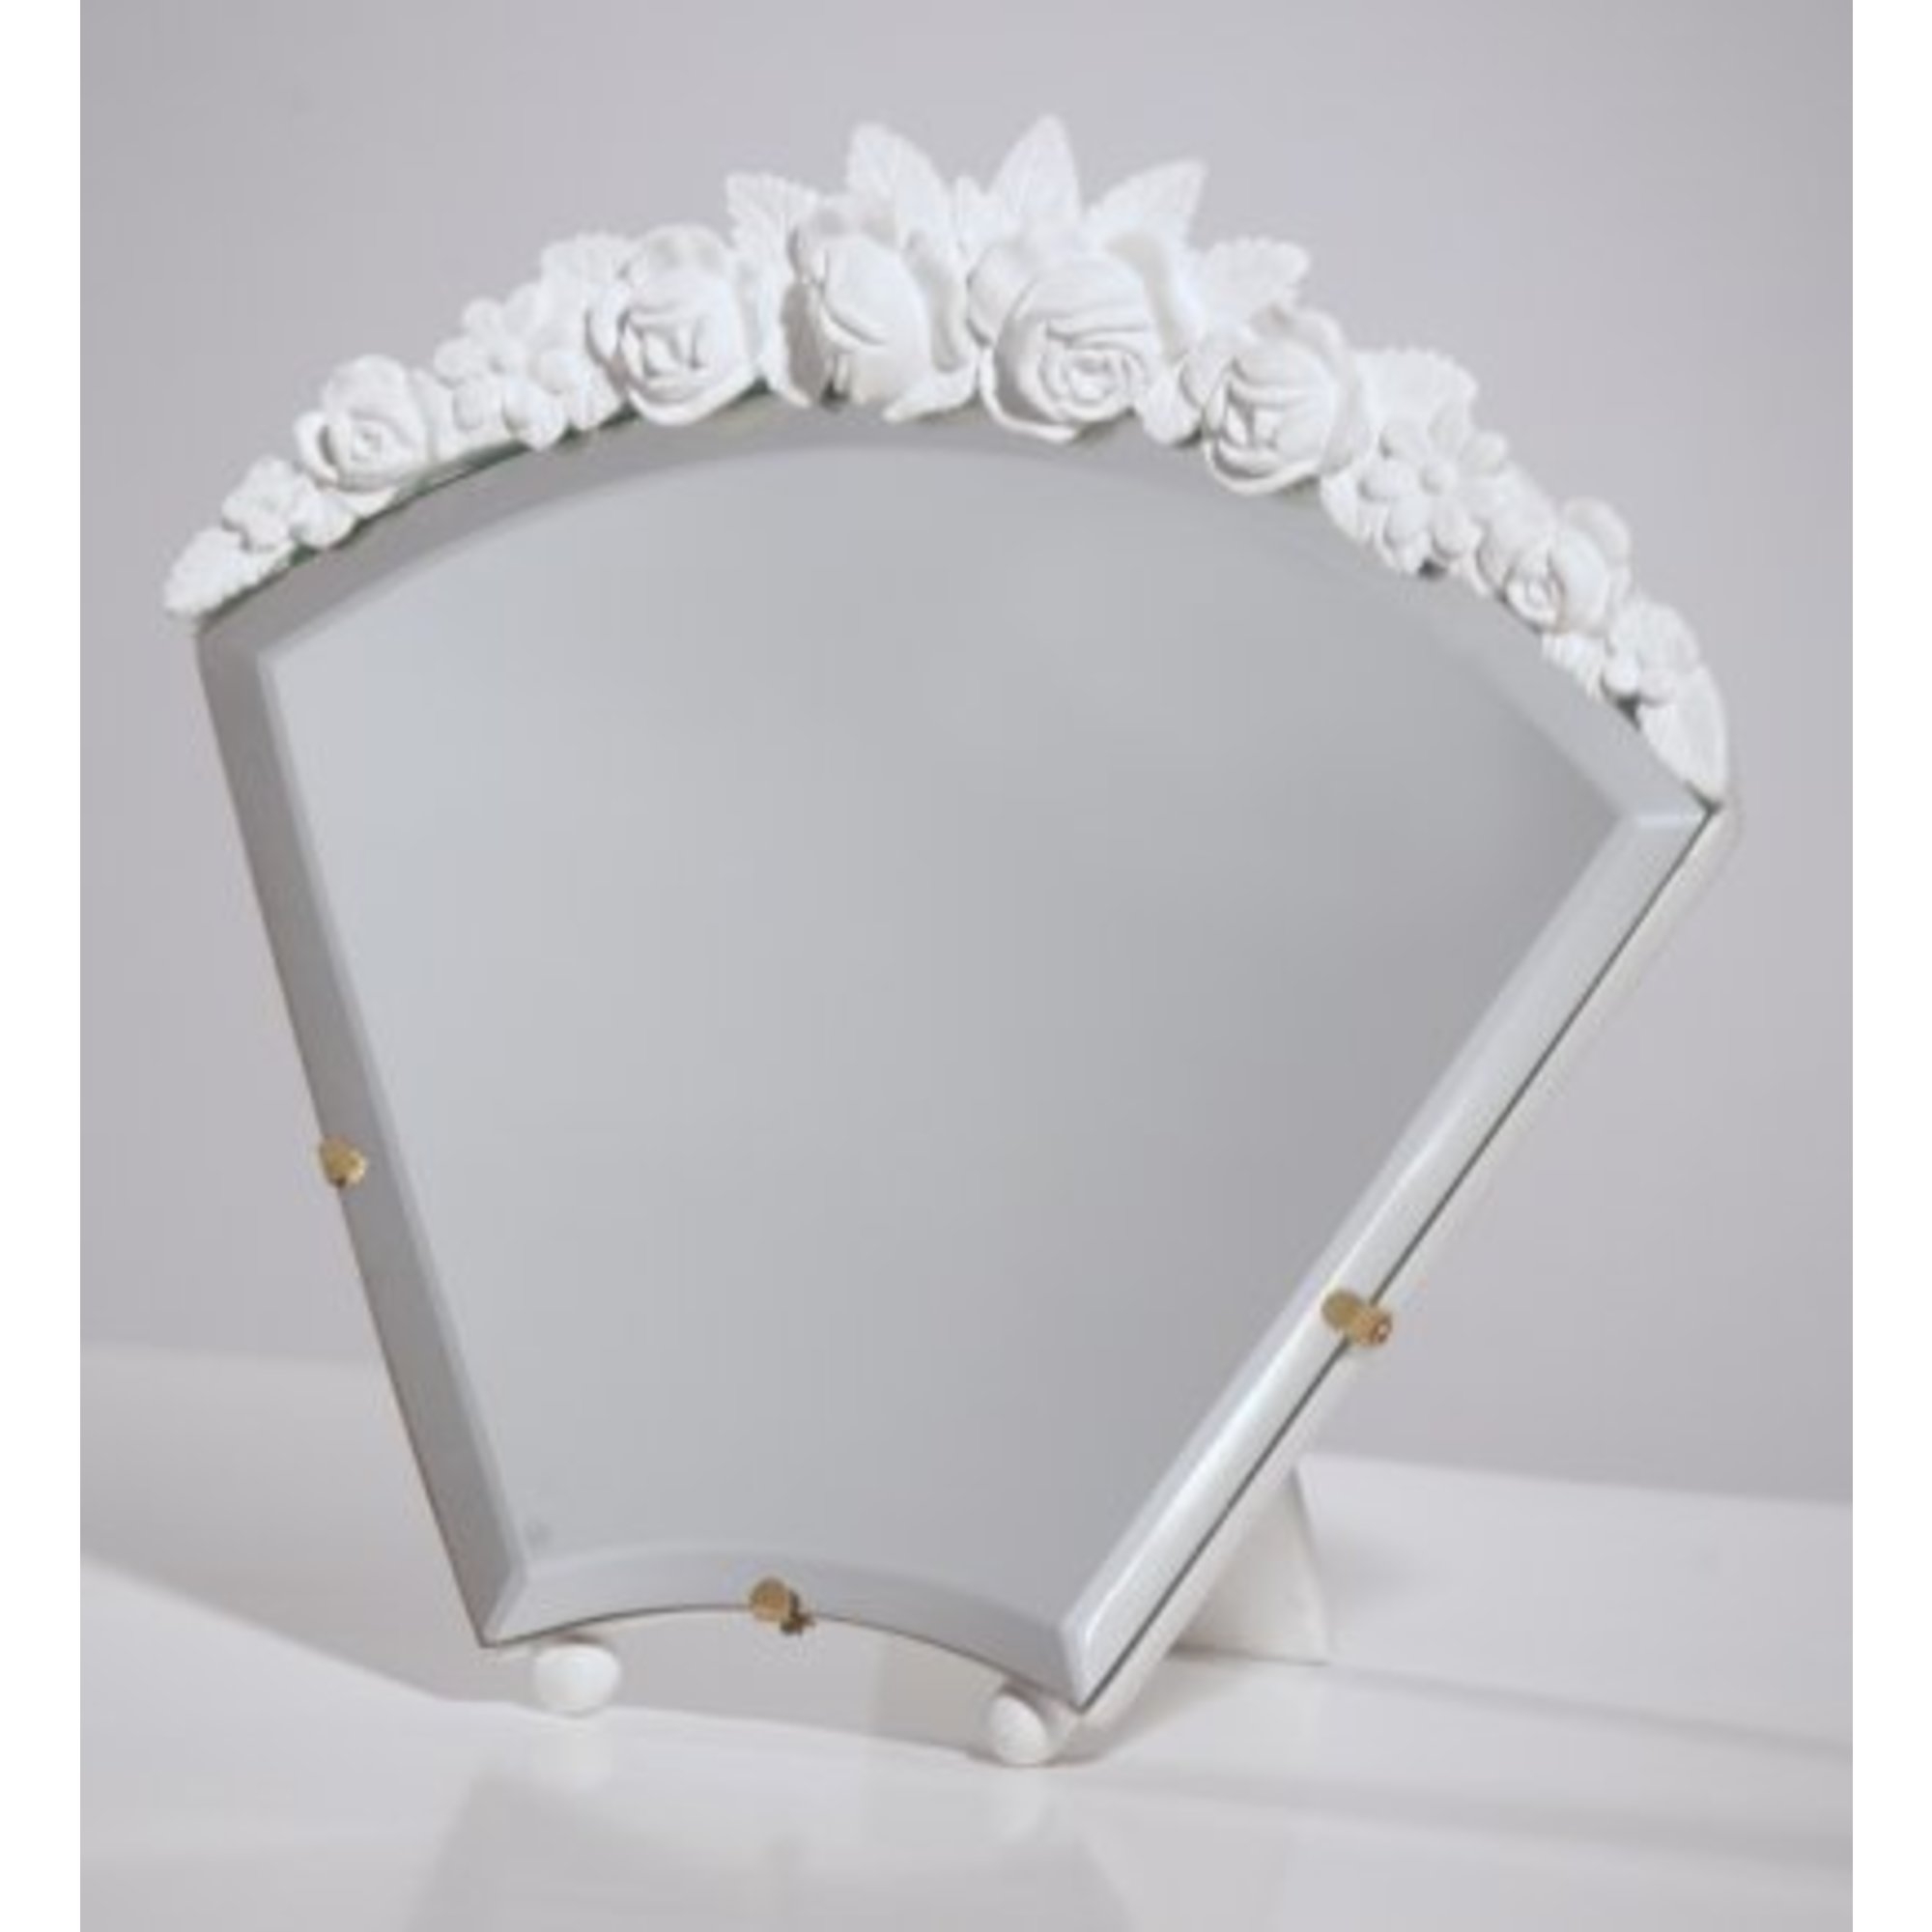 Barbola Floral White Chalk Paint Decorative Table or Wall Bedroom Mirror